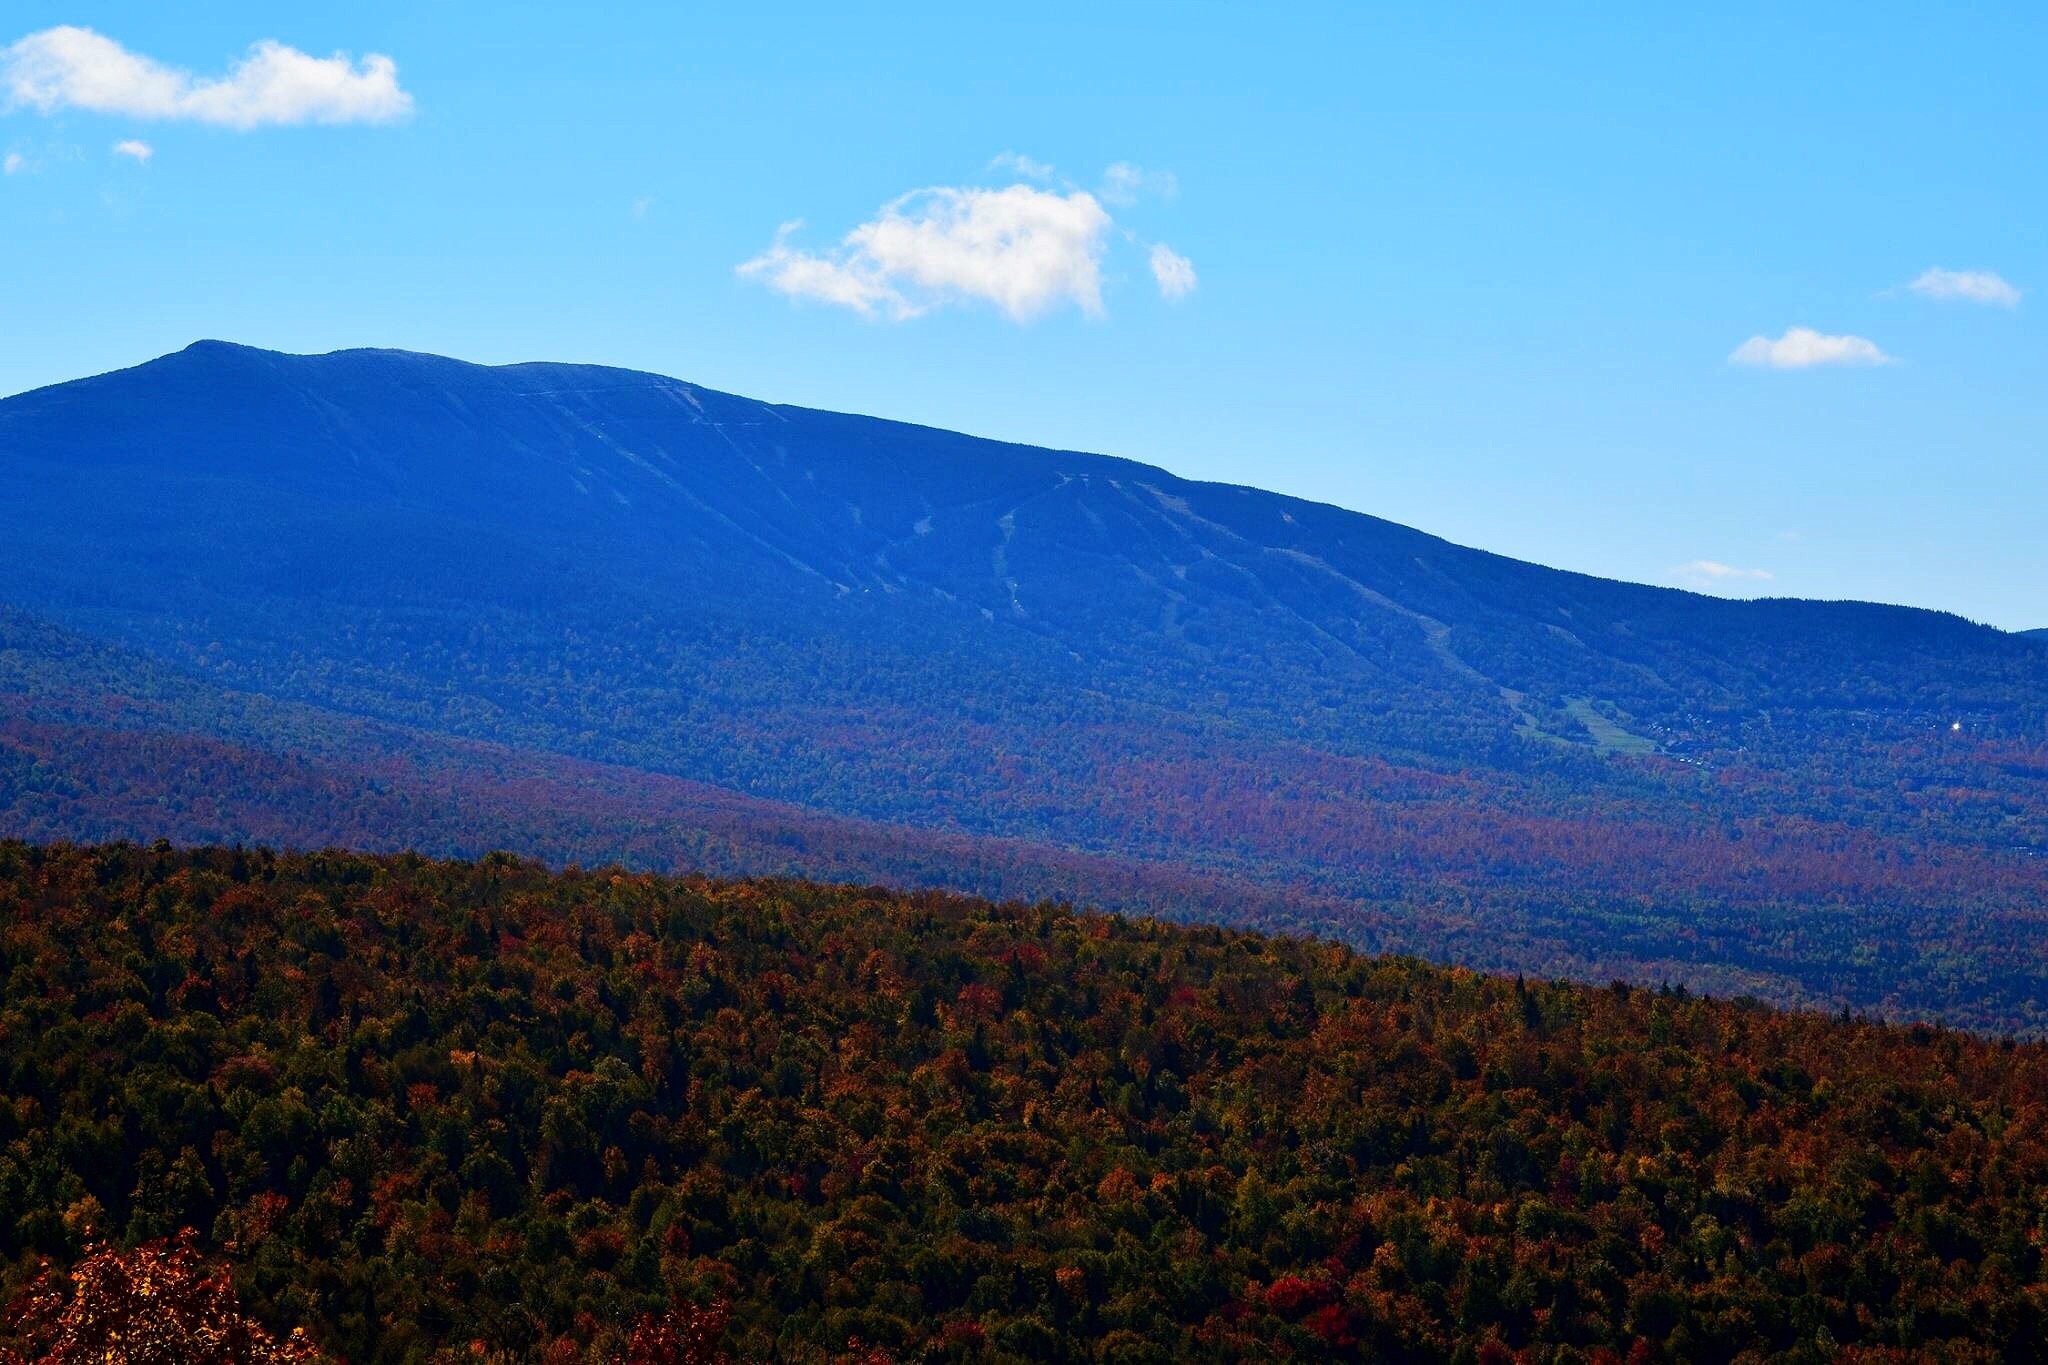 A Autumn view of Saddleback Mountain from Quill Hill scenic lookout.